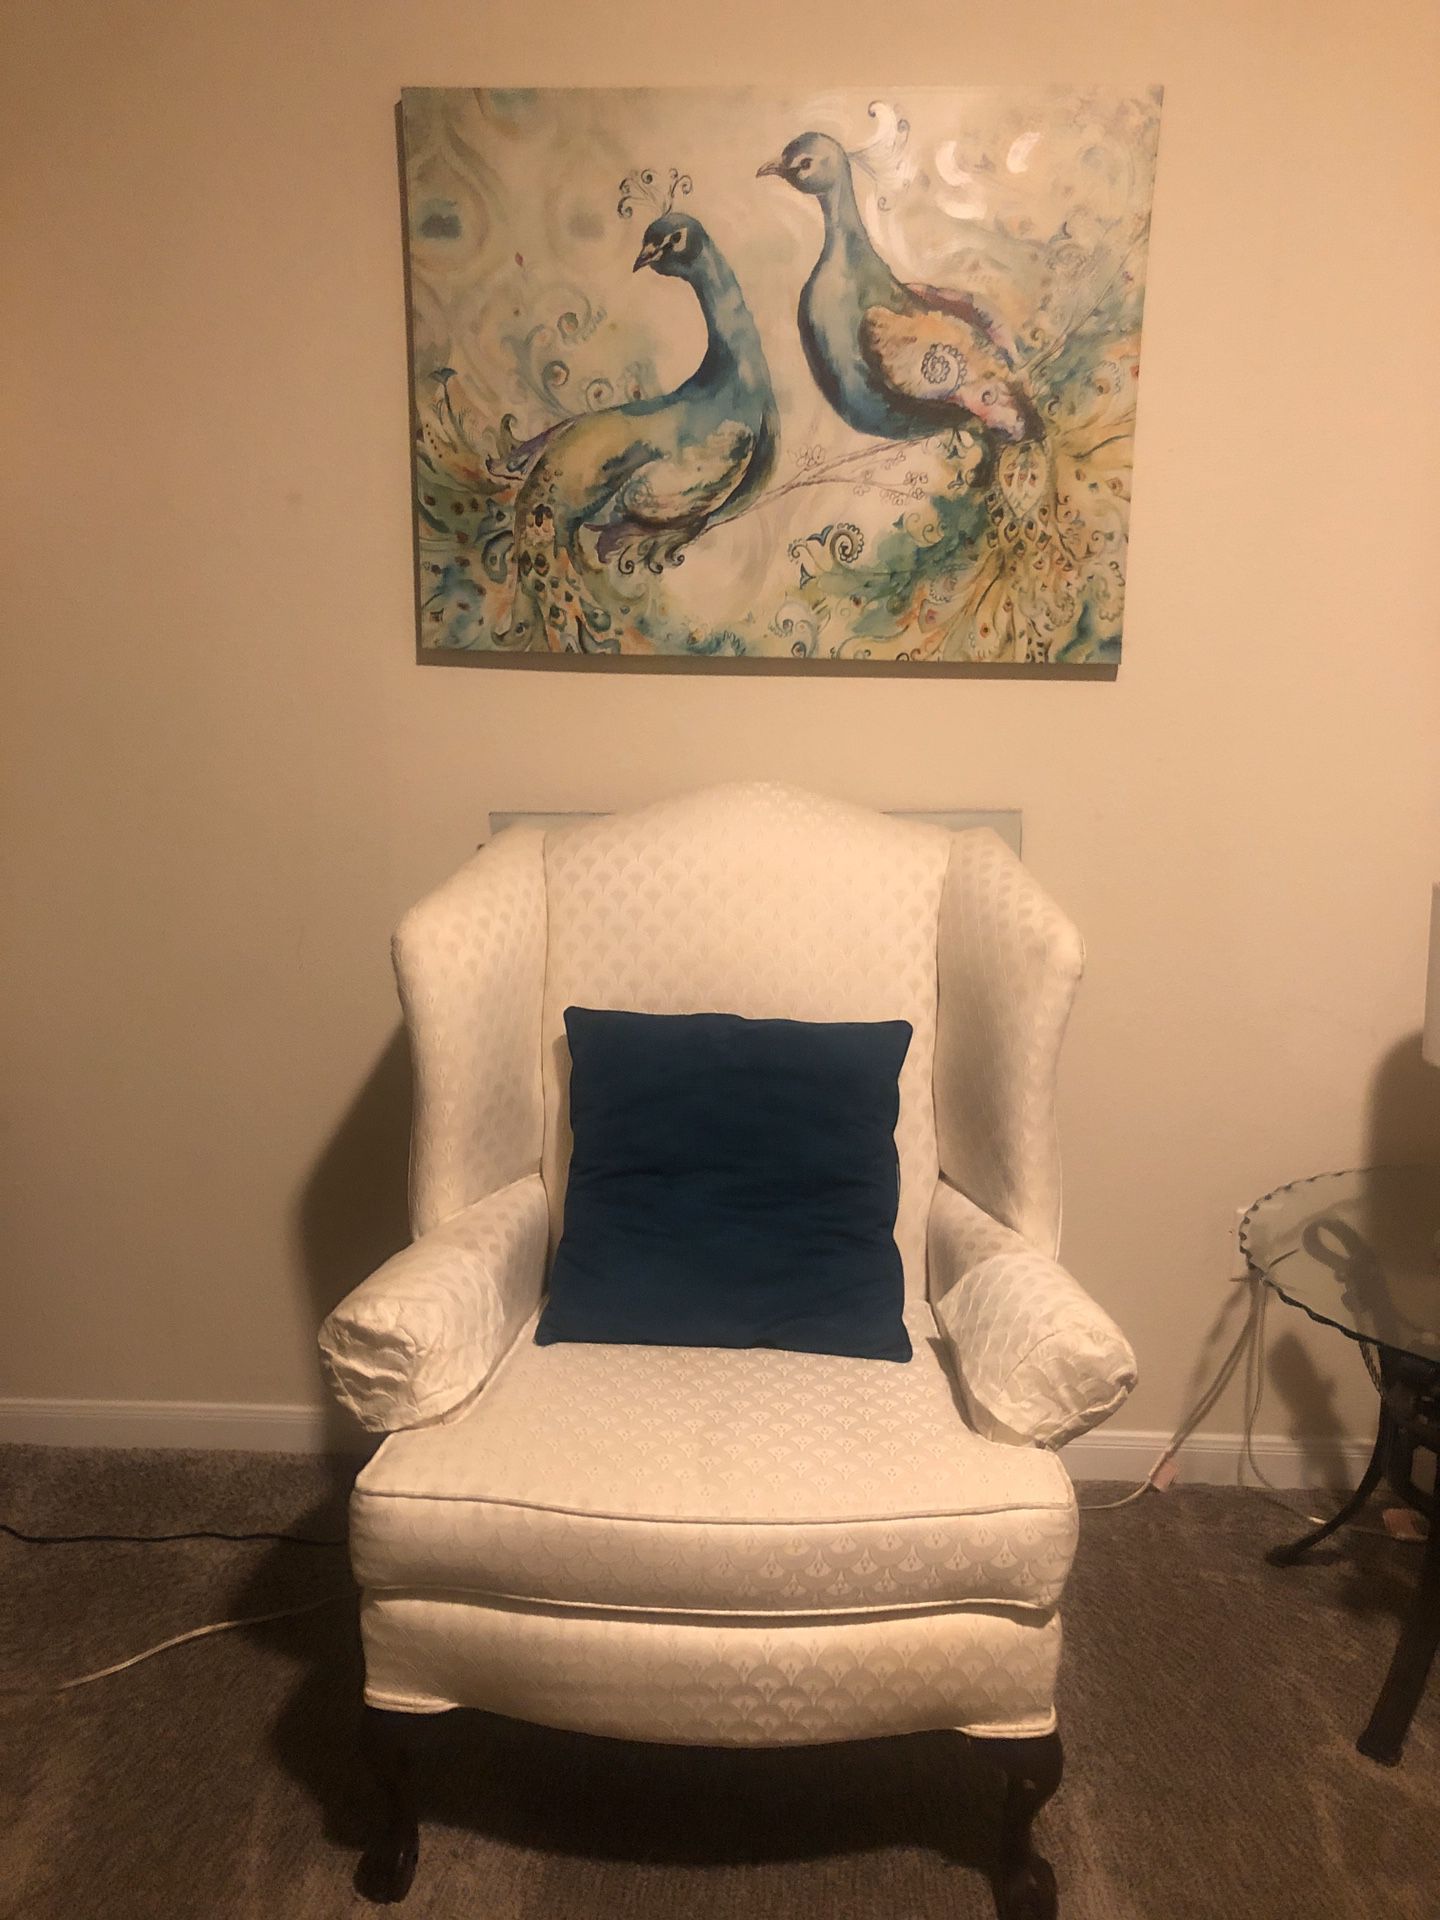 Everything for $300.00 includes: couch, chair, end, sofa and cocktail table, wall pictures, lamps, curtains and dining room table and 4 chairs.